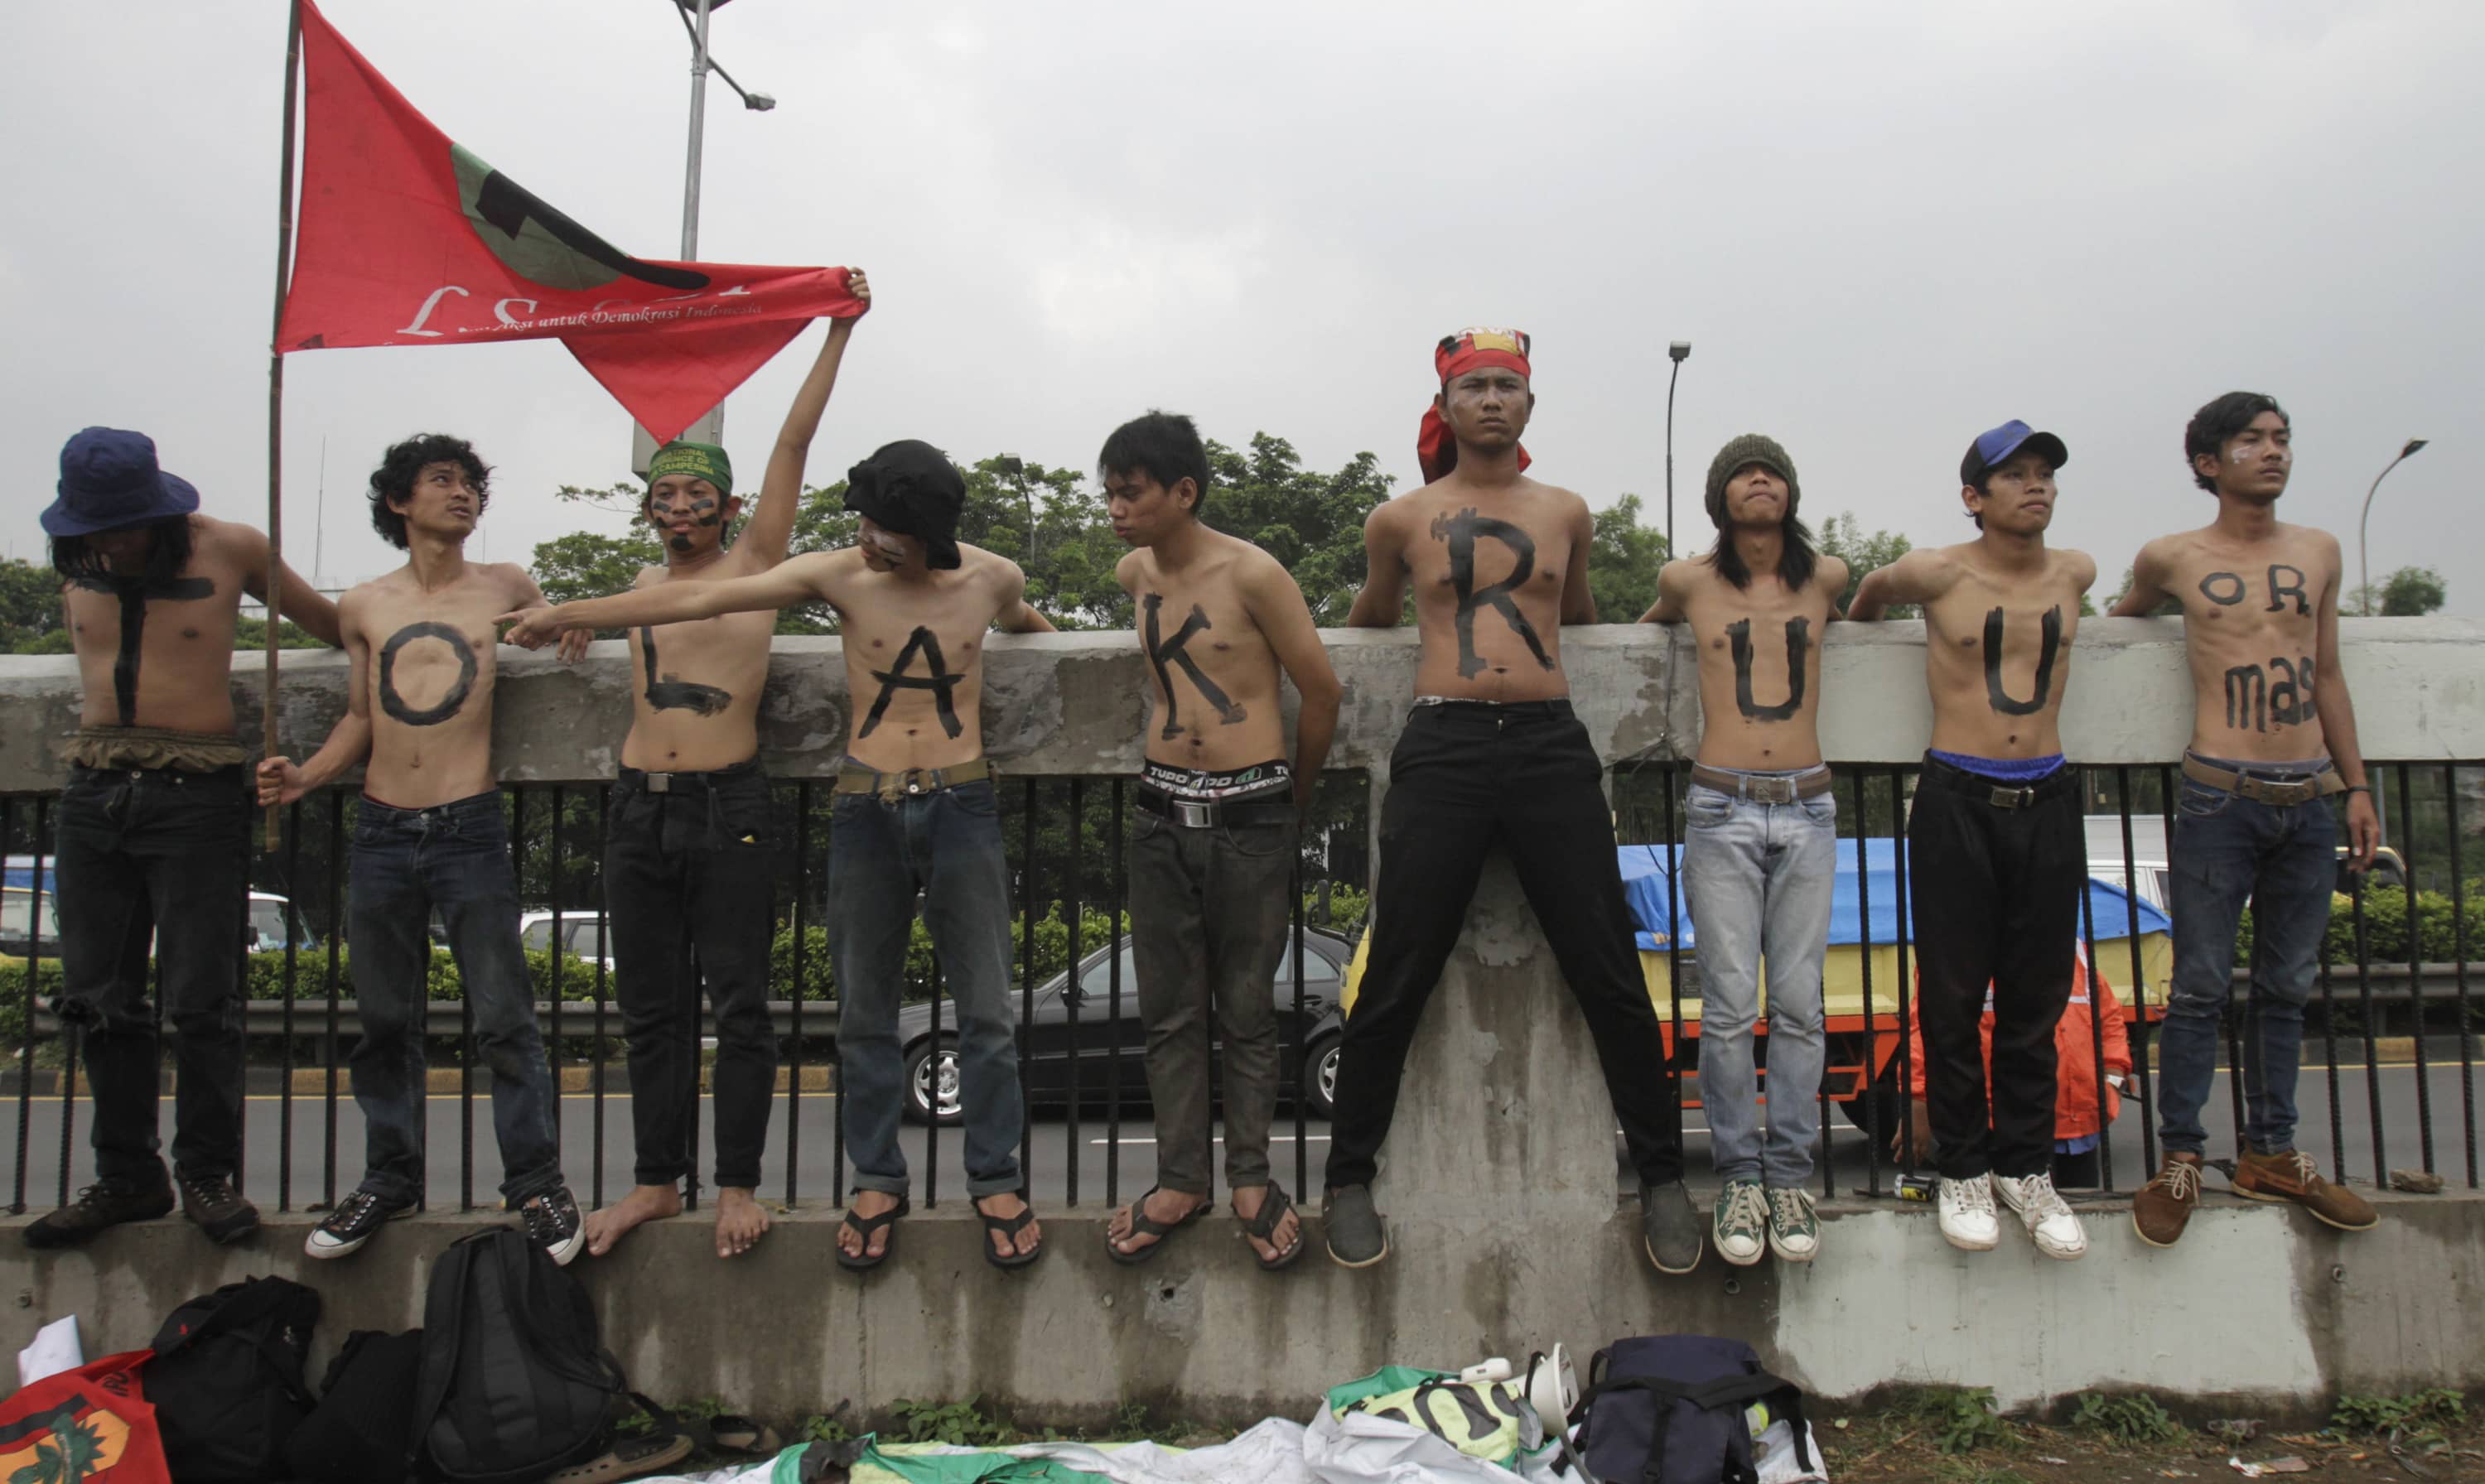 Students protest outside the parliament building in Jakarta, while parliament members hold a meeting to pass the mass organization bill, 2 July 2013; the words on the students' chests read, "reject the mass organization bill", REUTERS/Supri